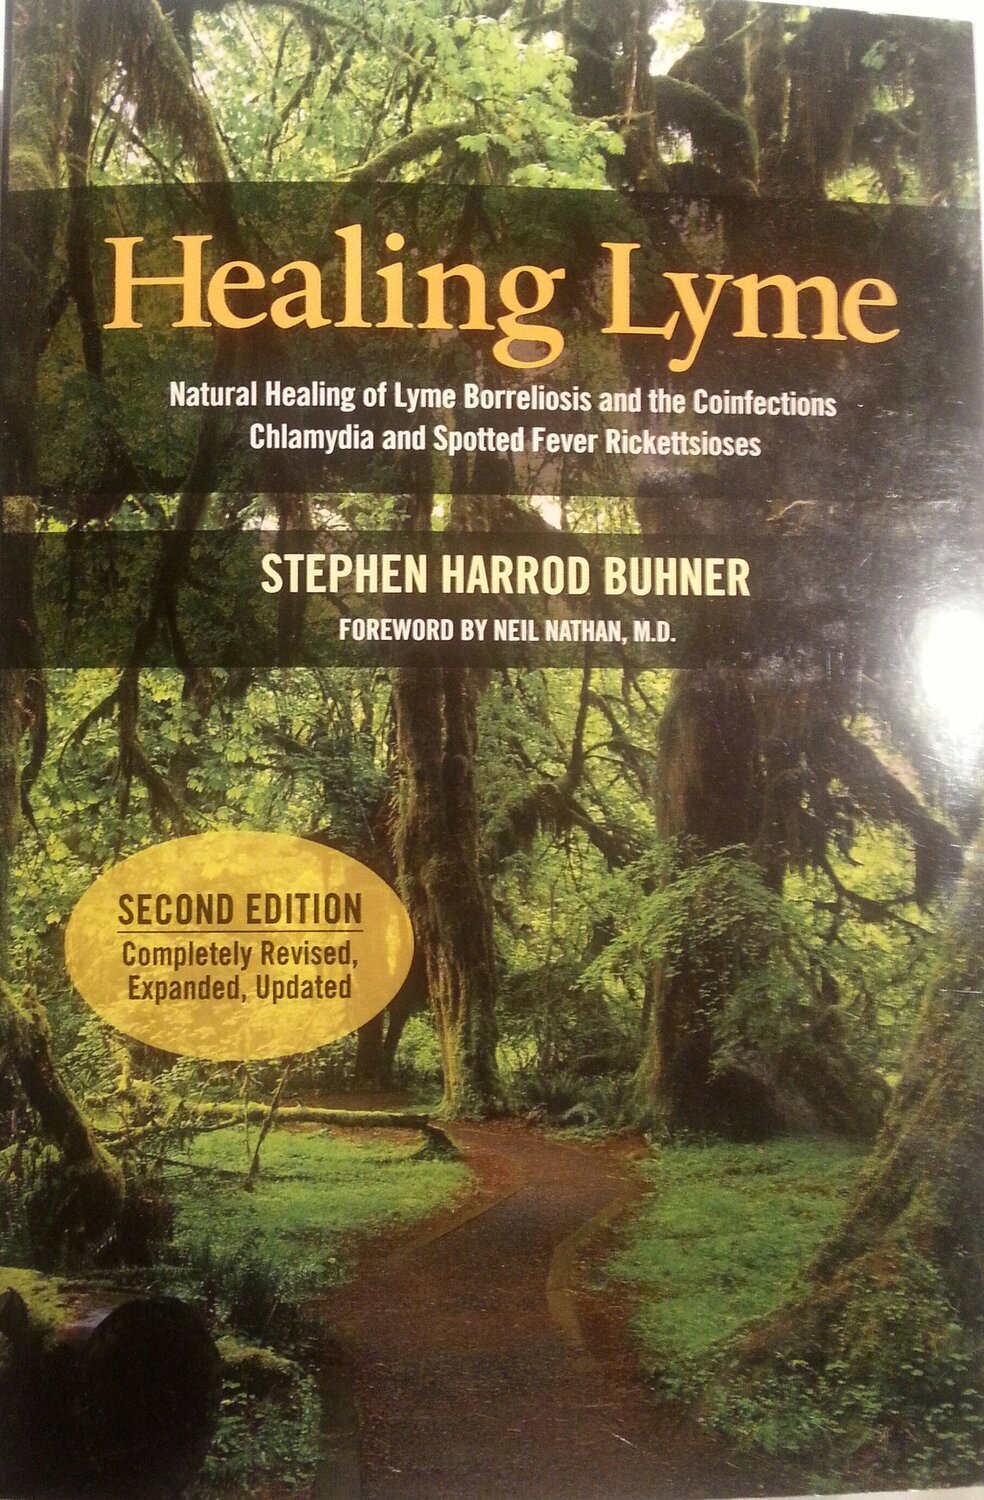 Stephen Buhner: Healing Lyme - Natural Healing & Prevention of Lyme Borreliosis and Its Coinfections